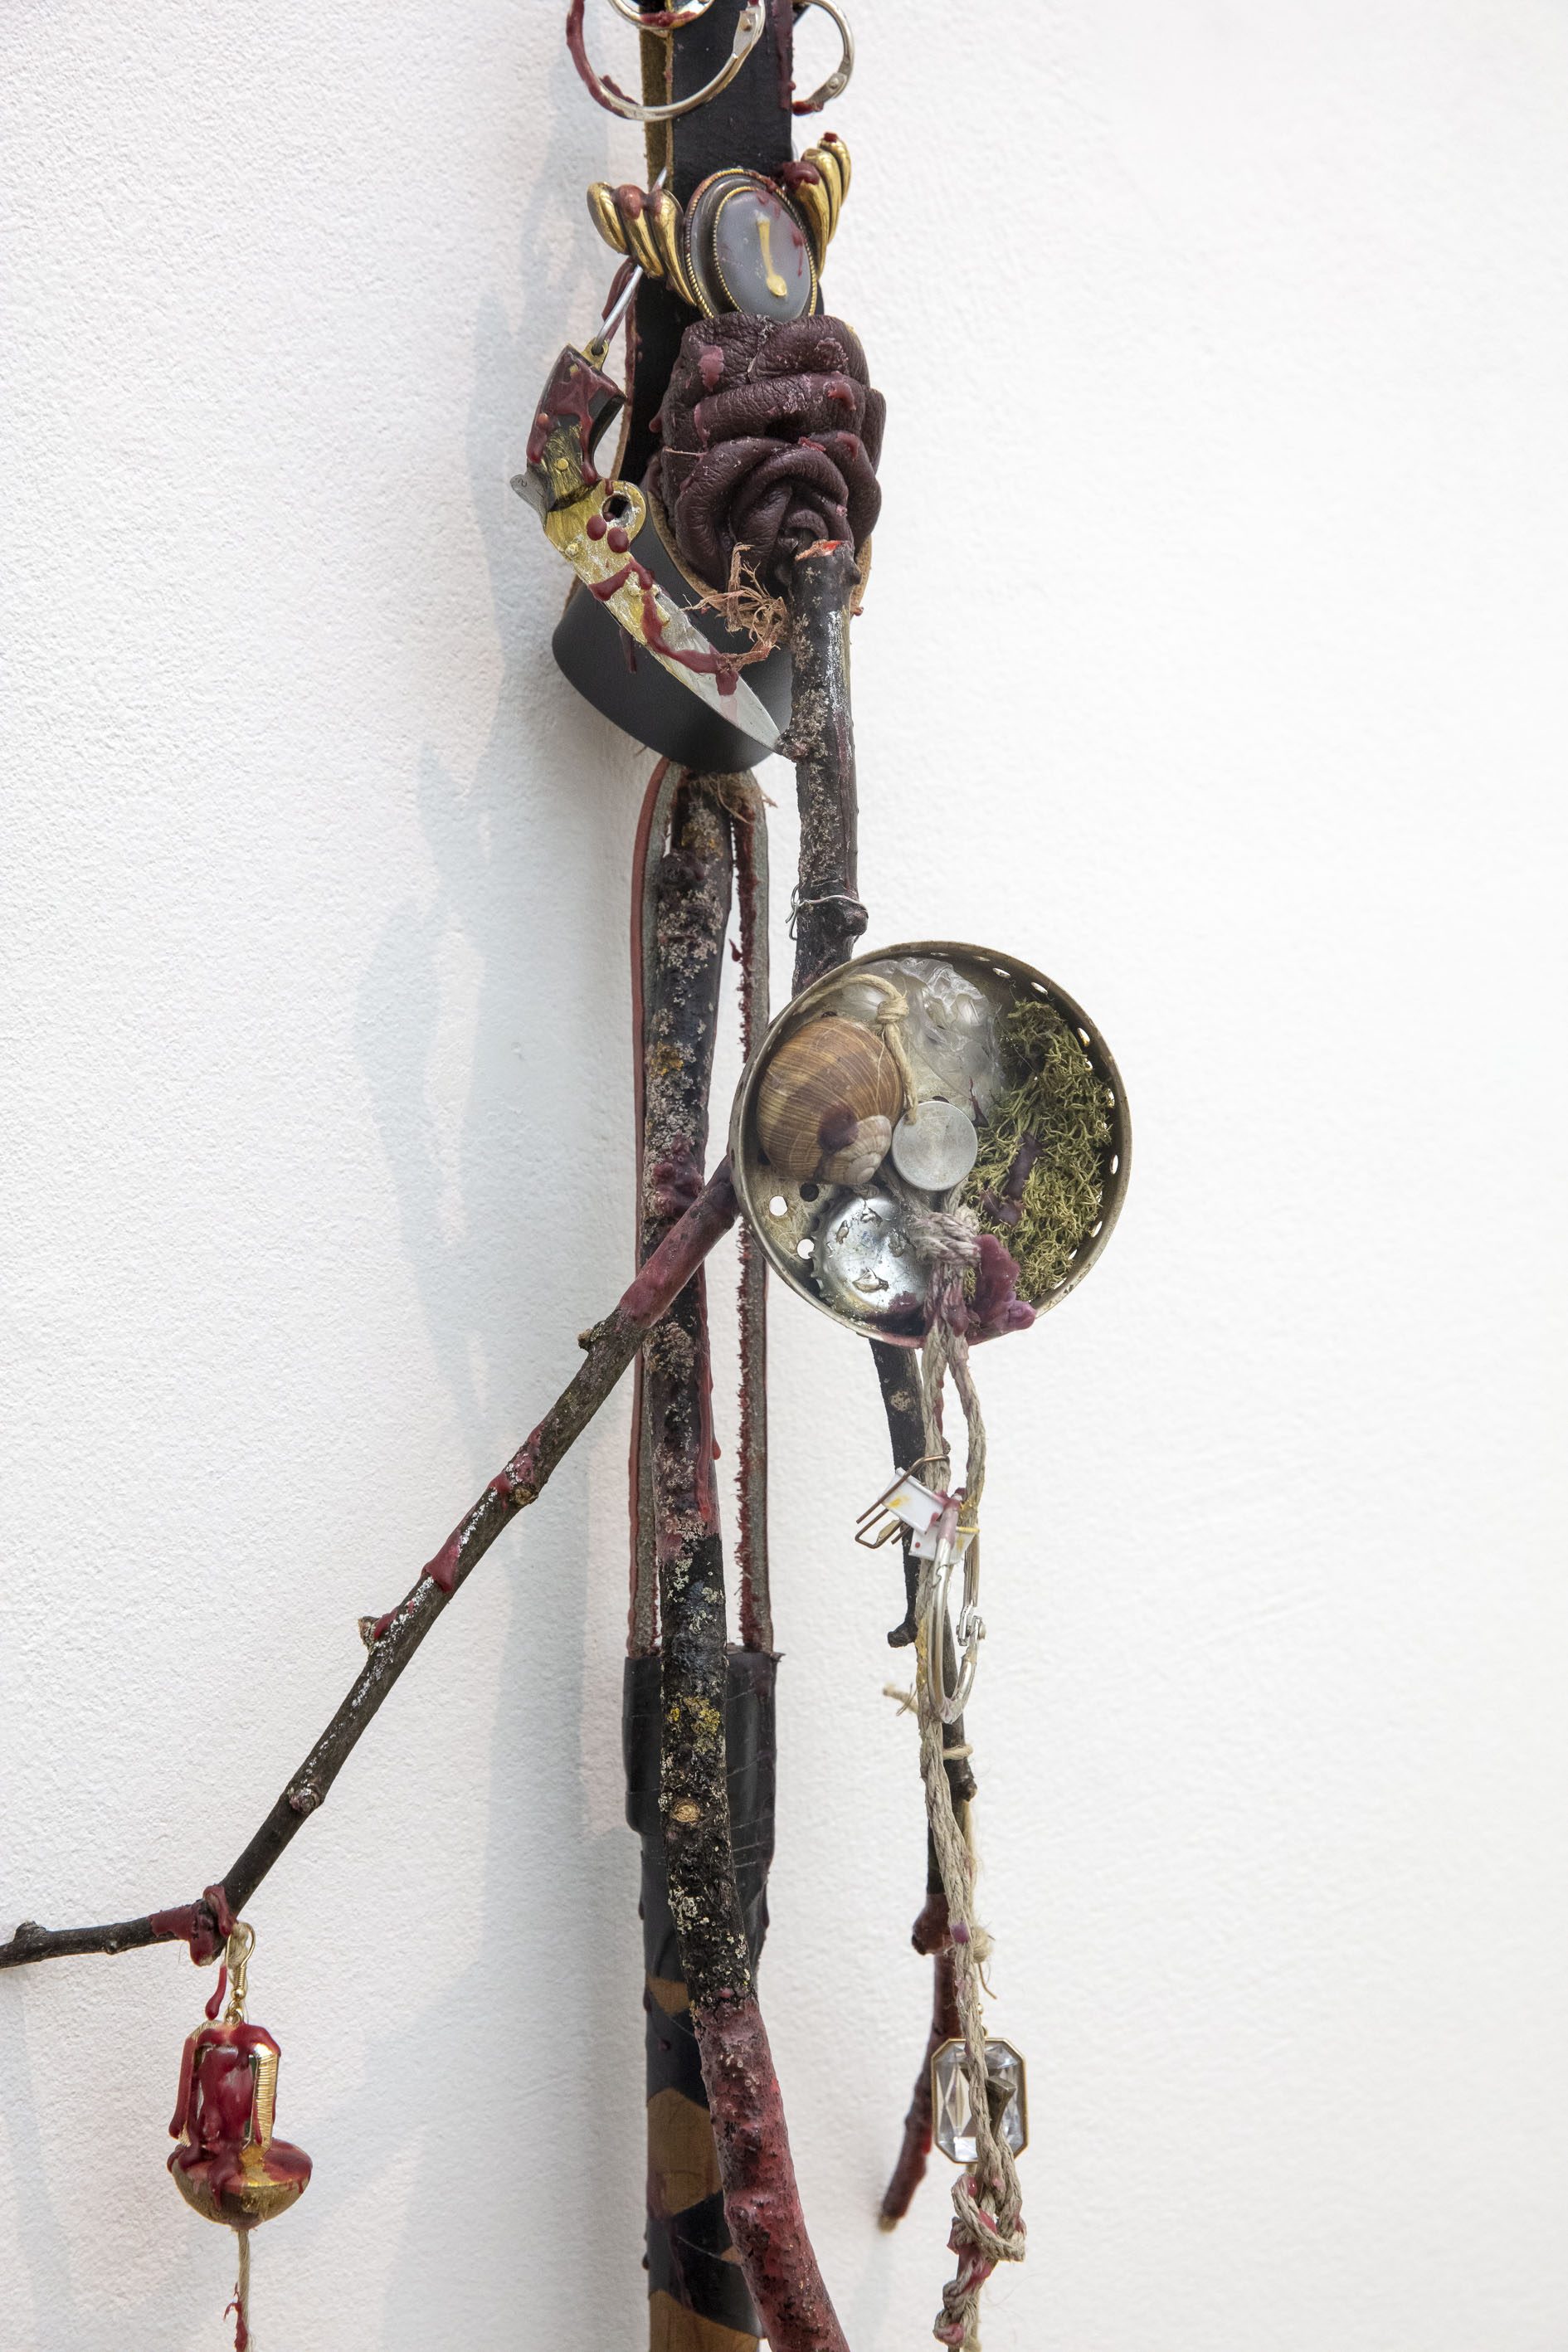 Anna McCarthy, Keychain, 2023, mixed media, wood, wax, jewellery, snail shell, moss, plastic hairclip, sink sieve, keyrings, present from suse, silver spoon, leather, gold & silver pigment, 260 × 25 × 10 cm